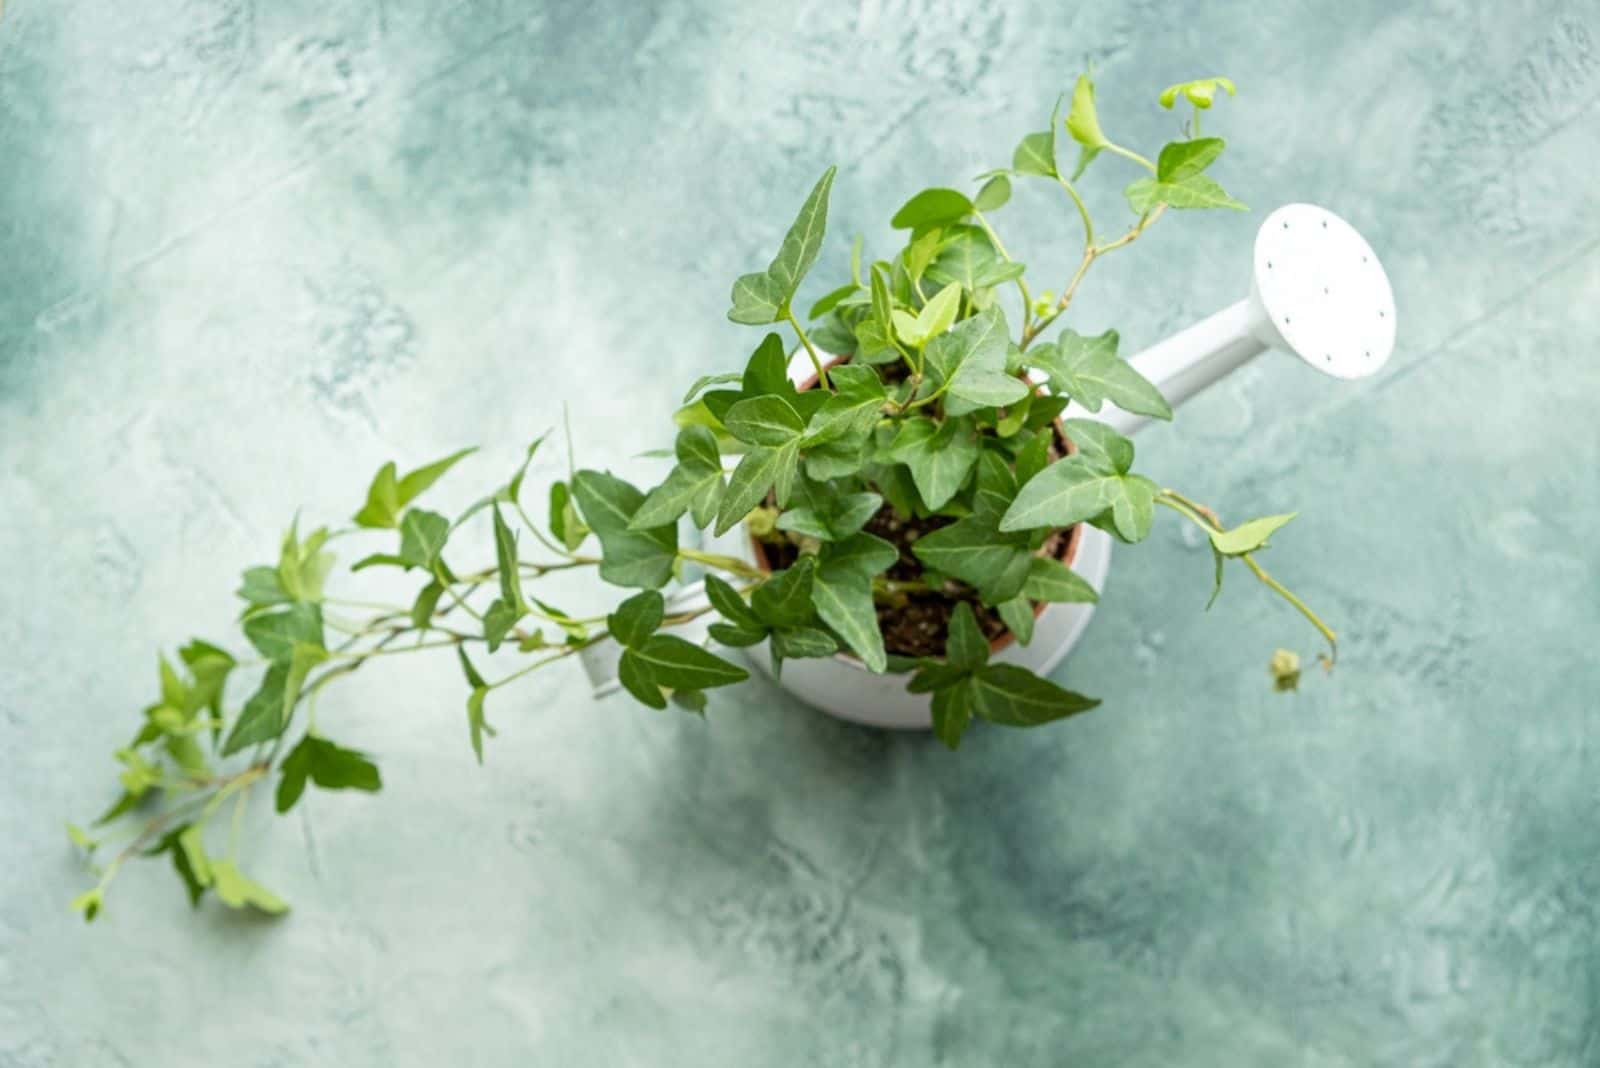 8 Houseplants To Grow In Water To Avoid Messy Soil!